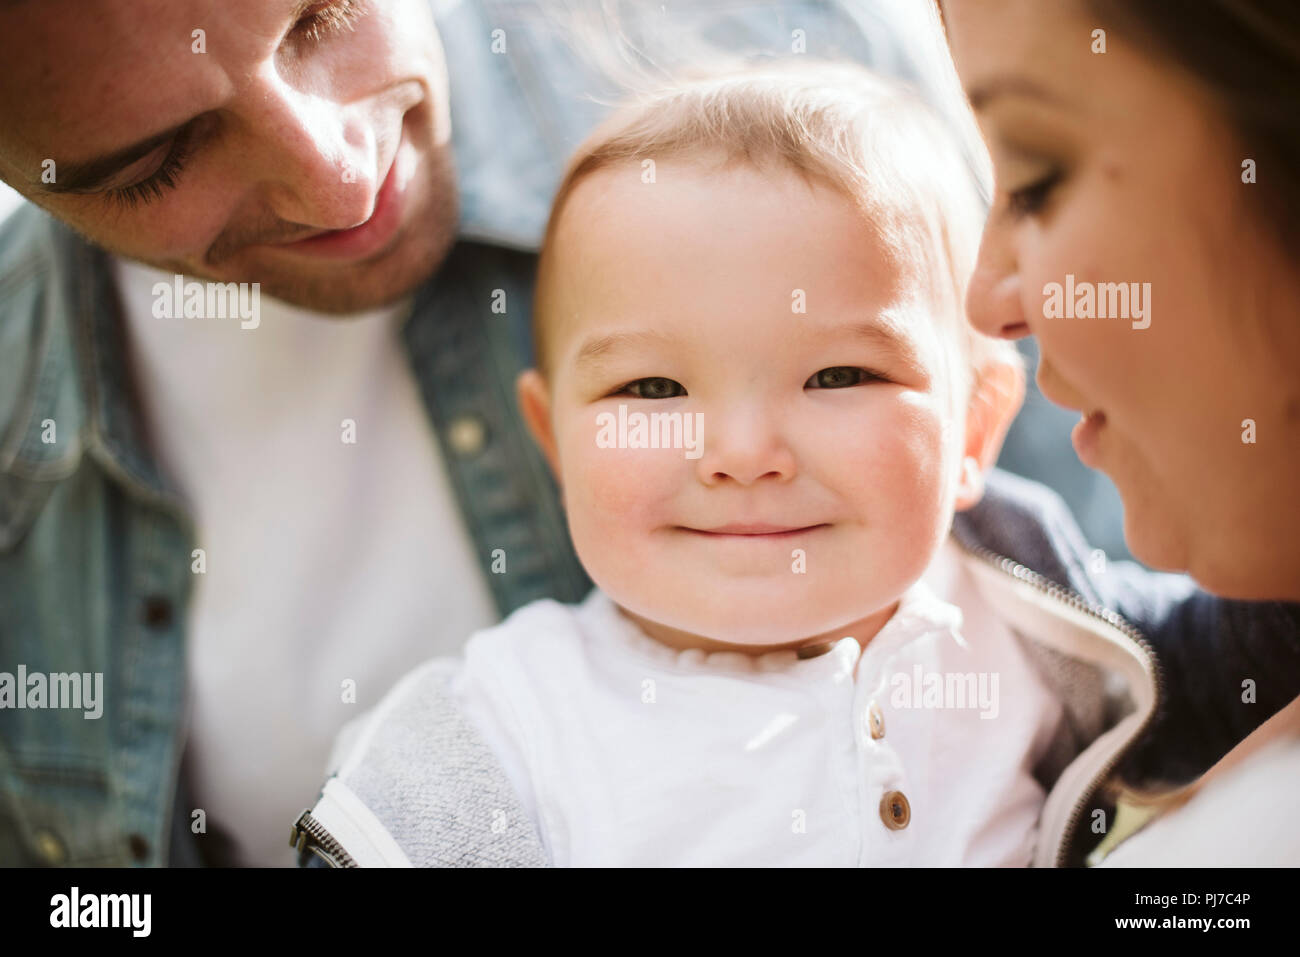 Les parents holding baby boy looking at camera Banque D'Images